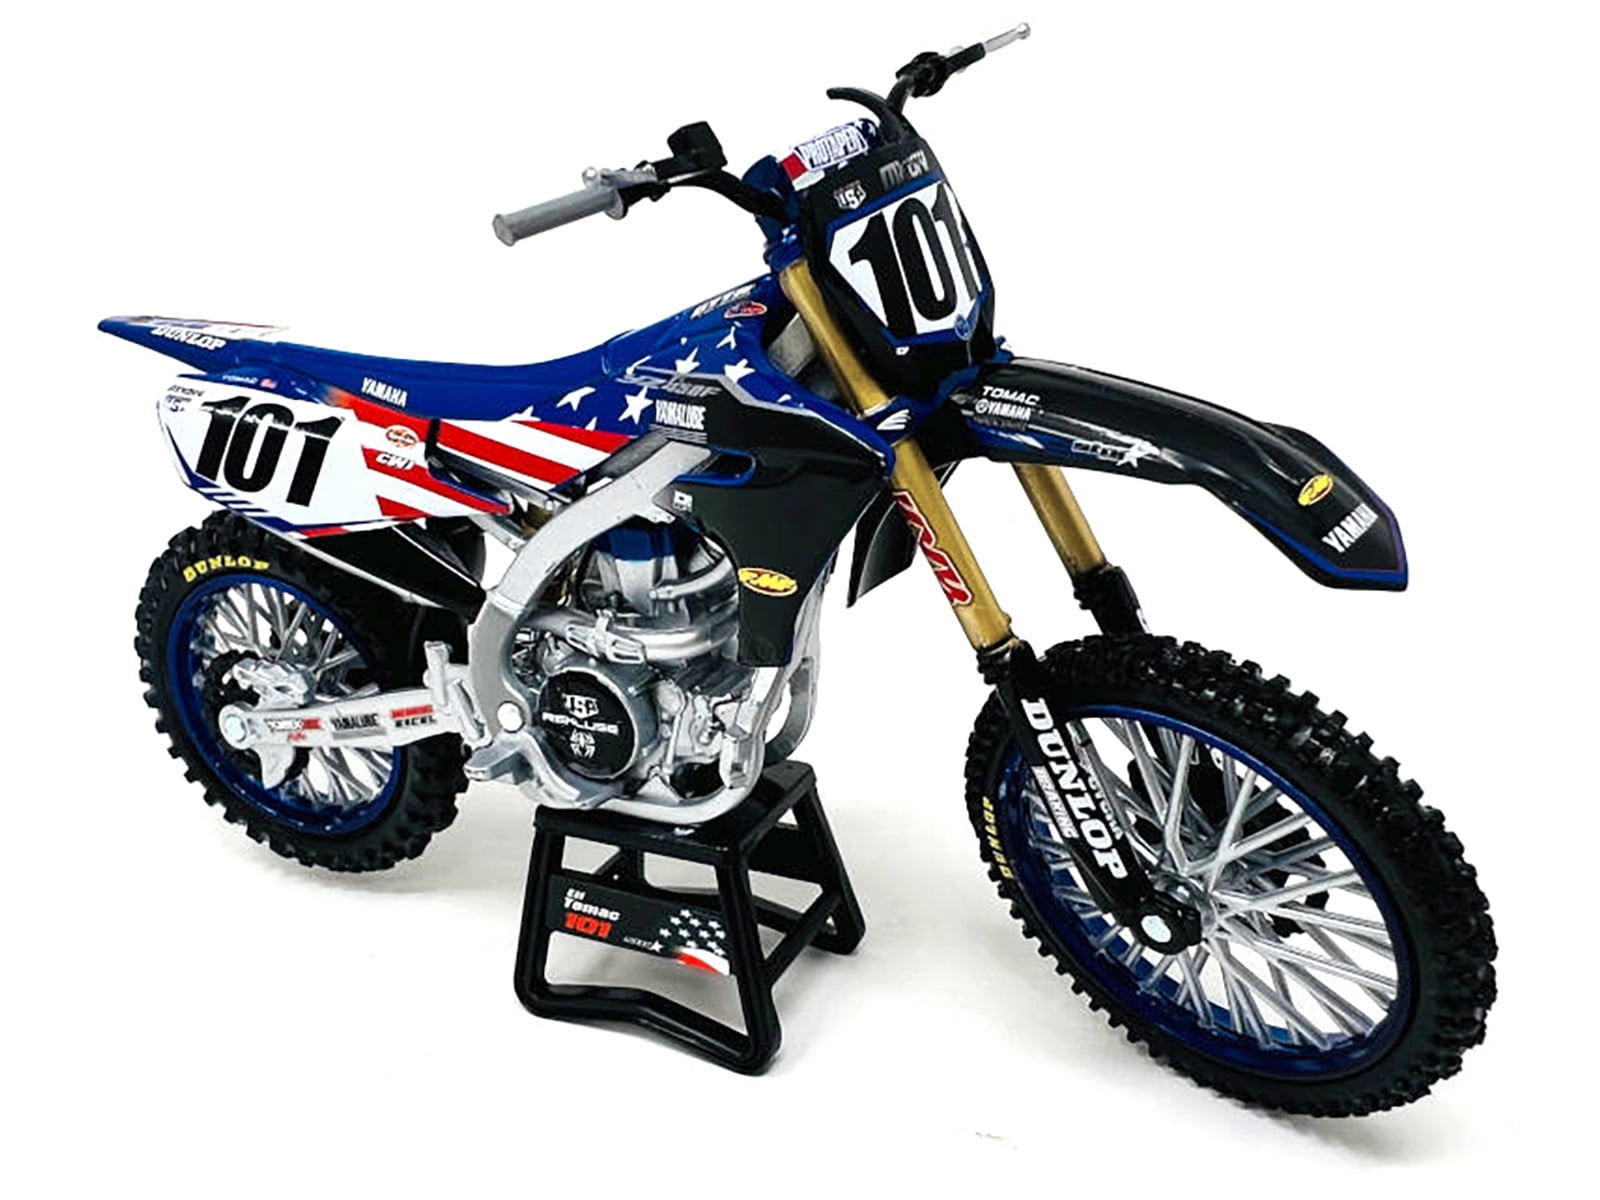 Yamaha YZ450F Dirt Bike Motorcycle #101 Eli Tomac American Flag Livery  Motocross of Nations 1/12 Model by New Ray 